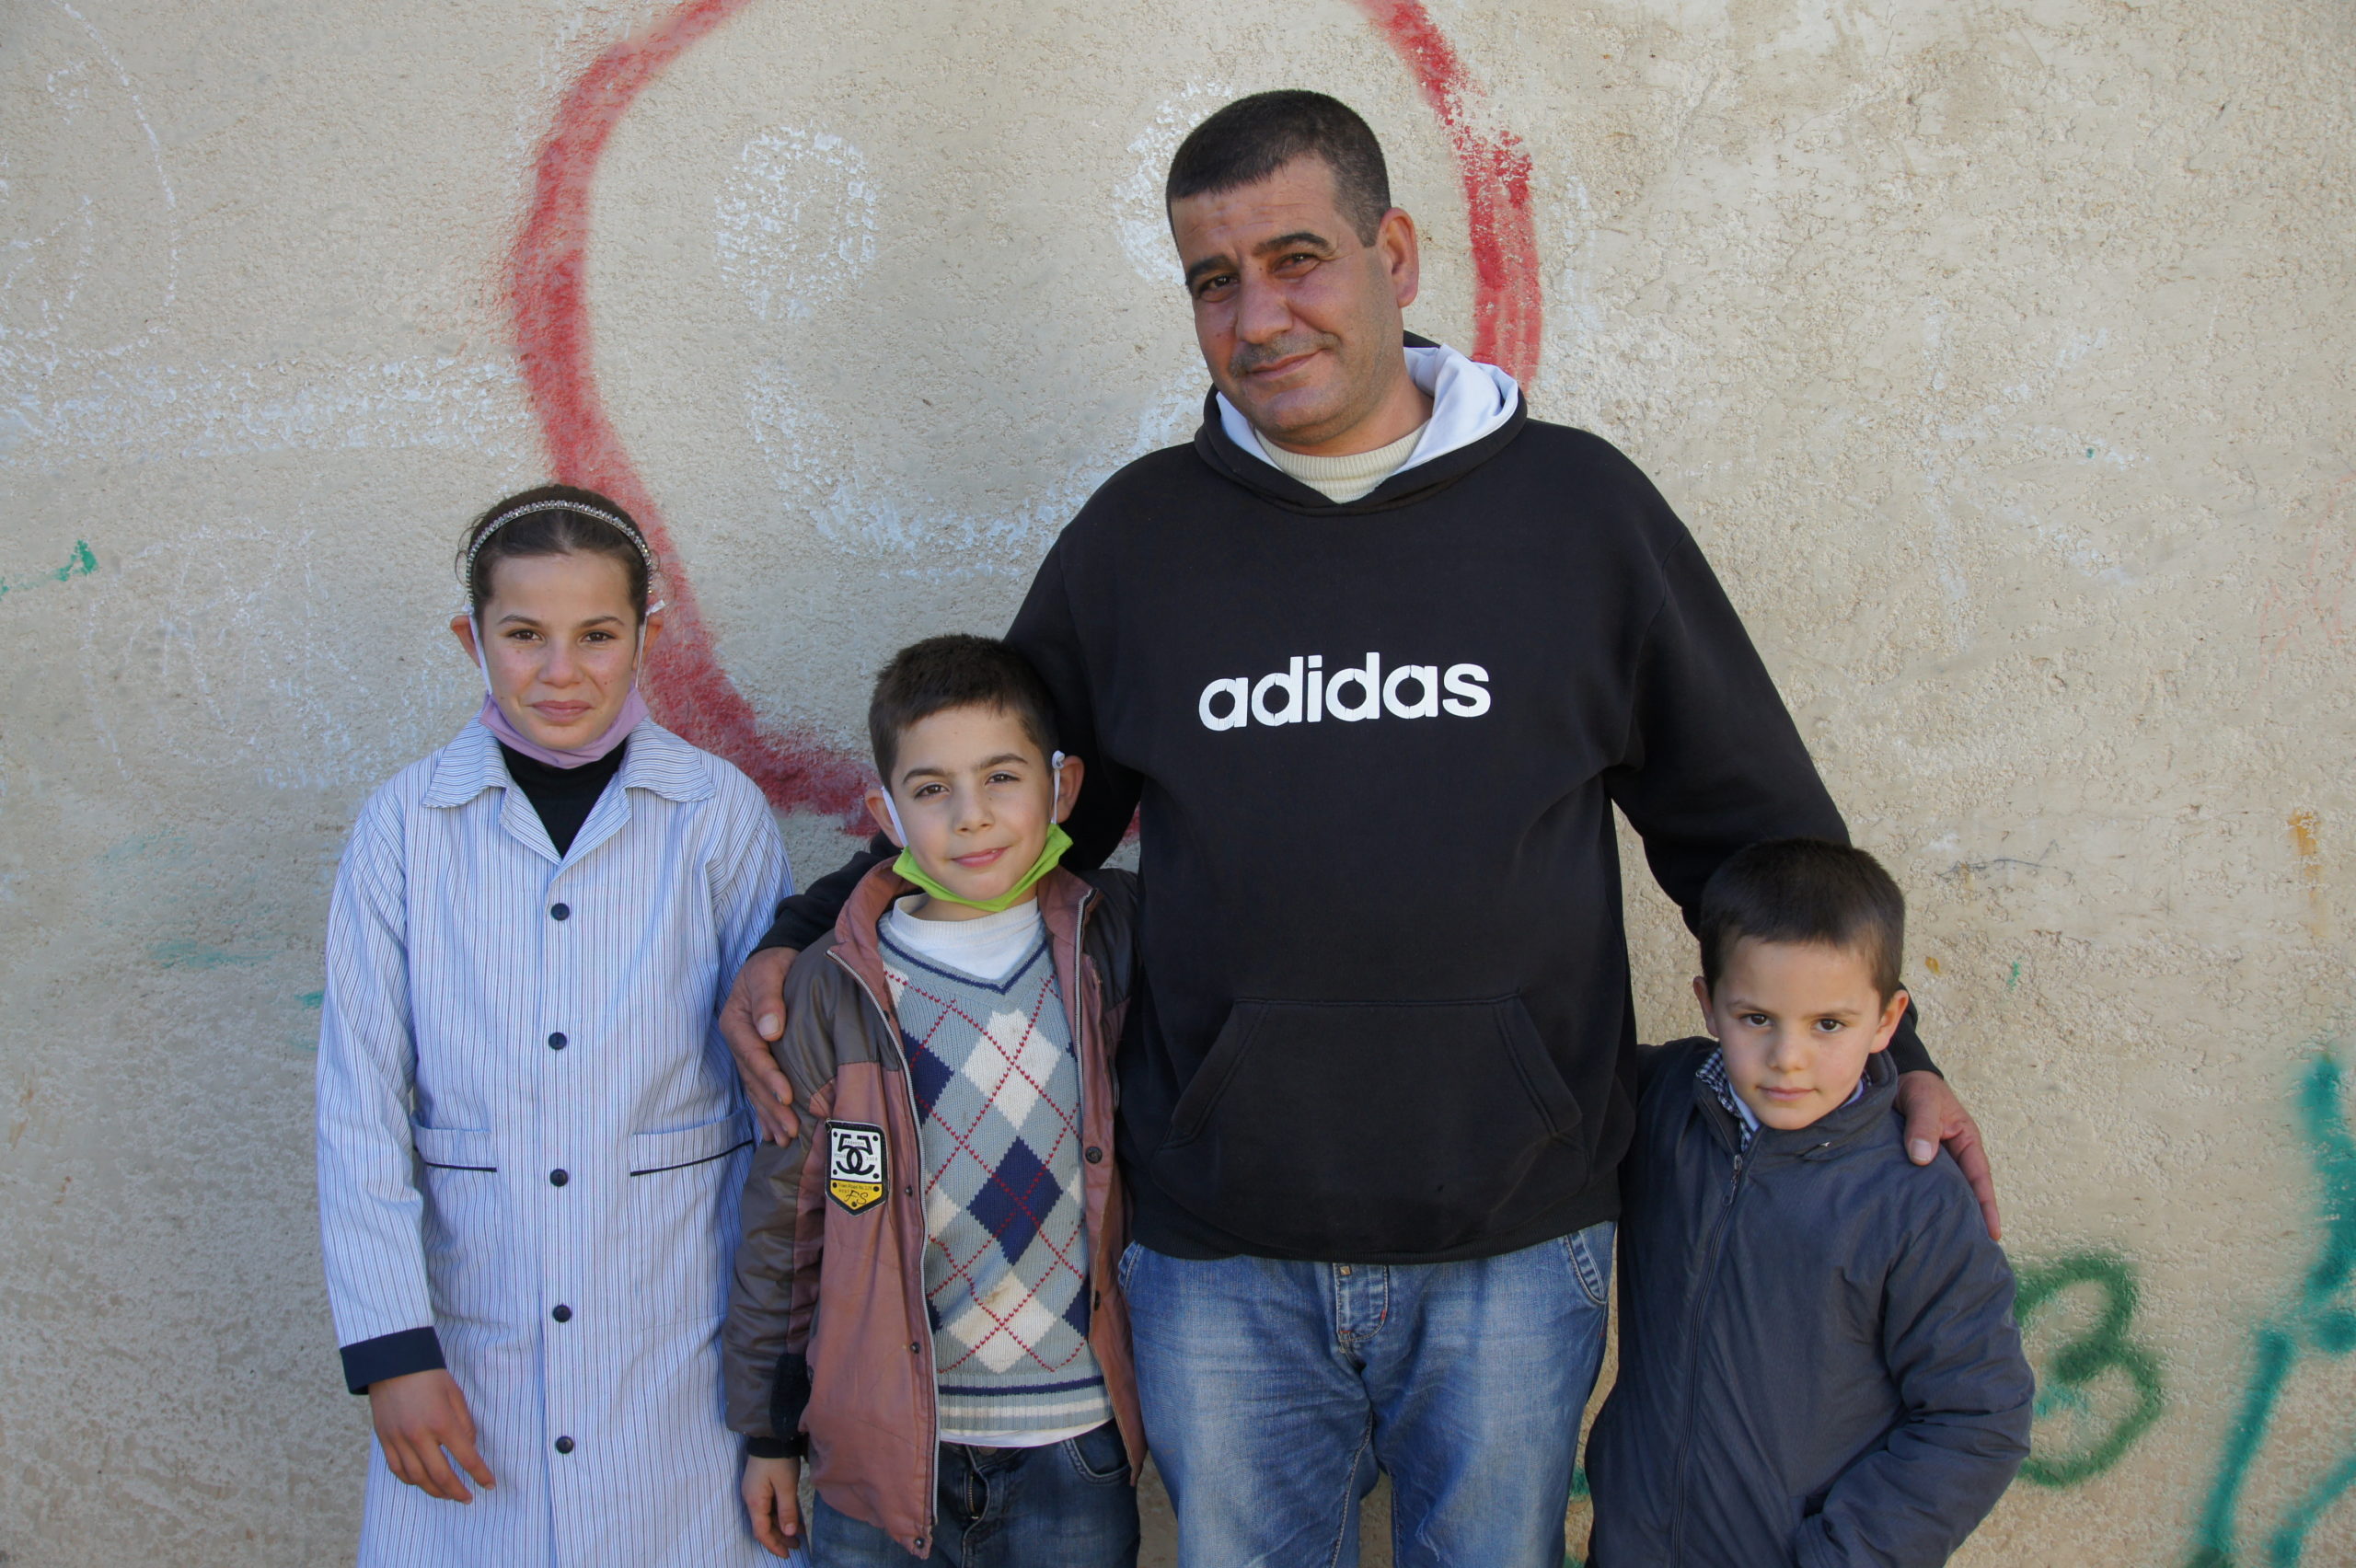 Syrian father standing with his daughter and two sons